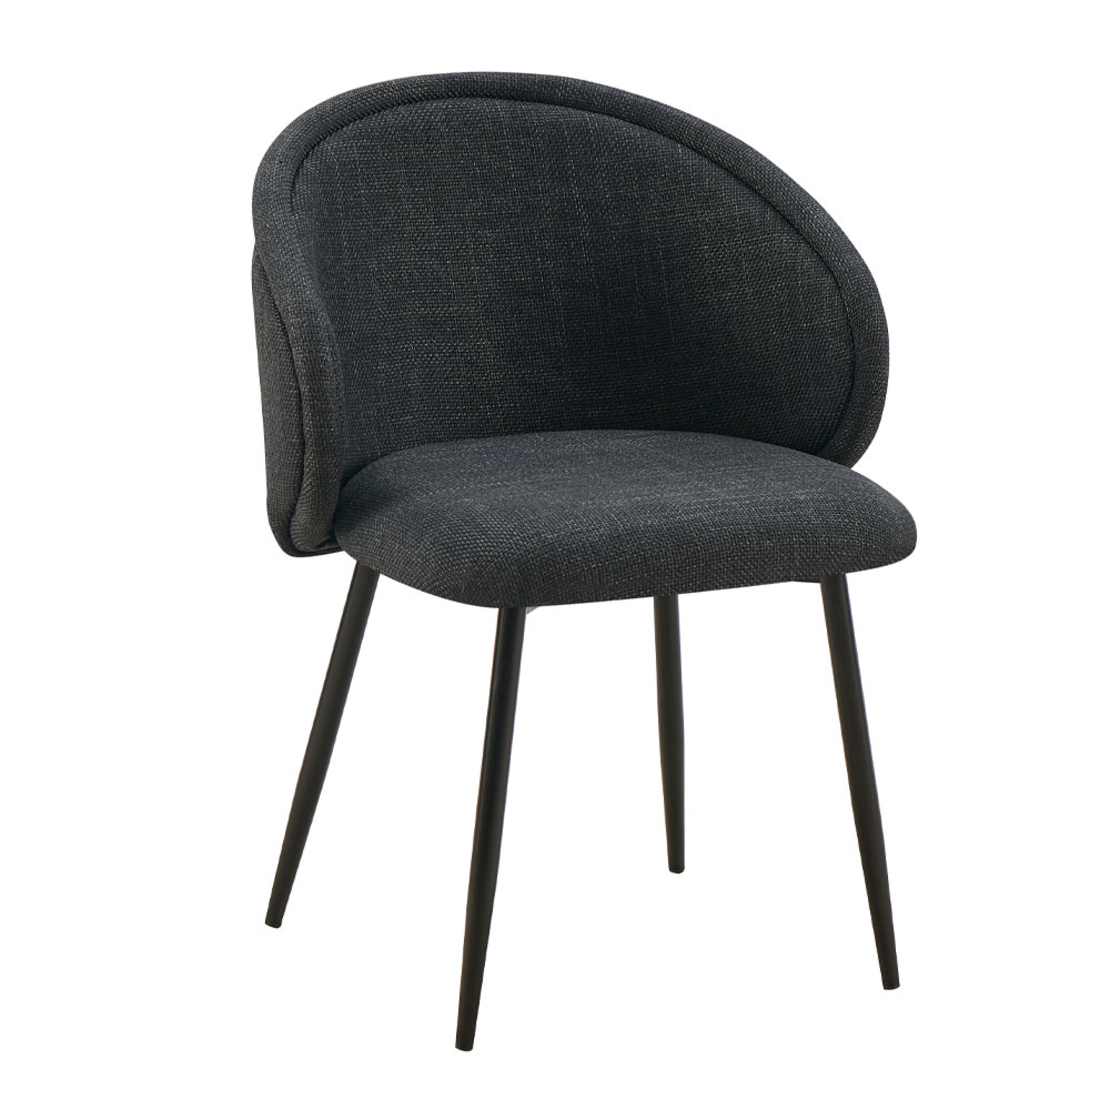 FIGARO CHAIR ARMCHAIR FABRIC ANTHRACITE METAL BLAC